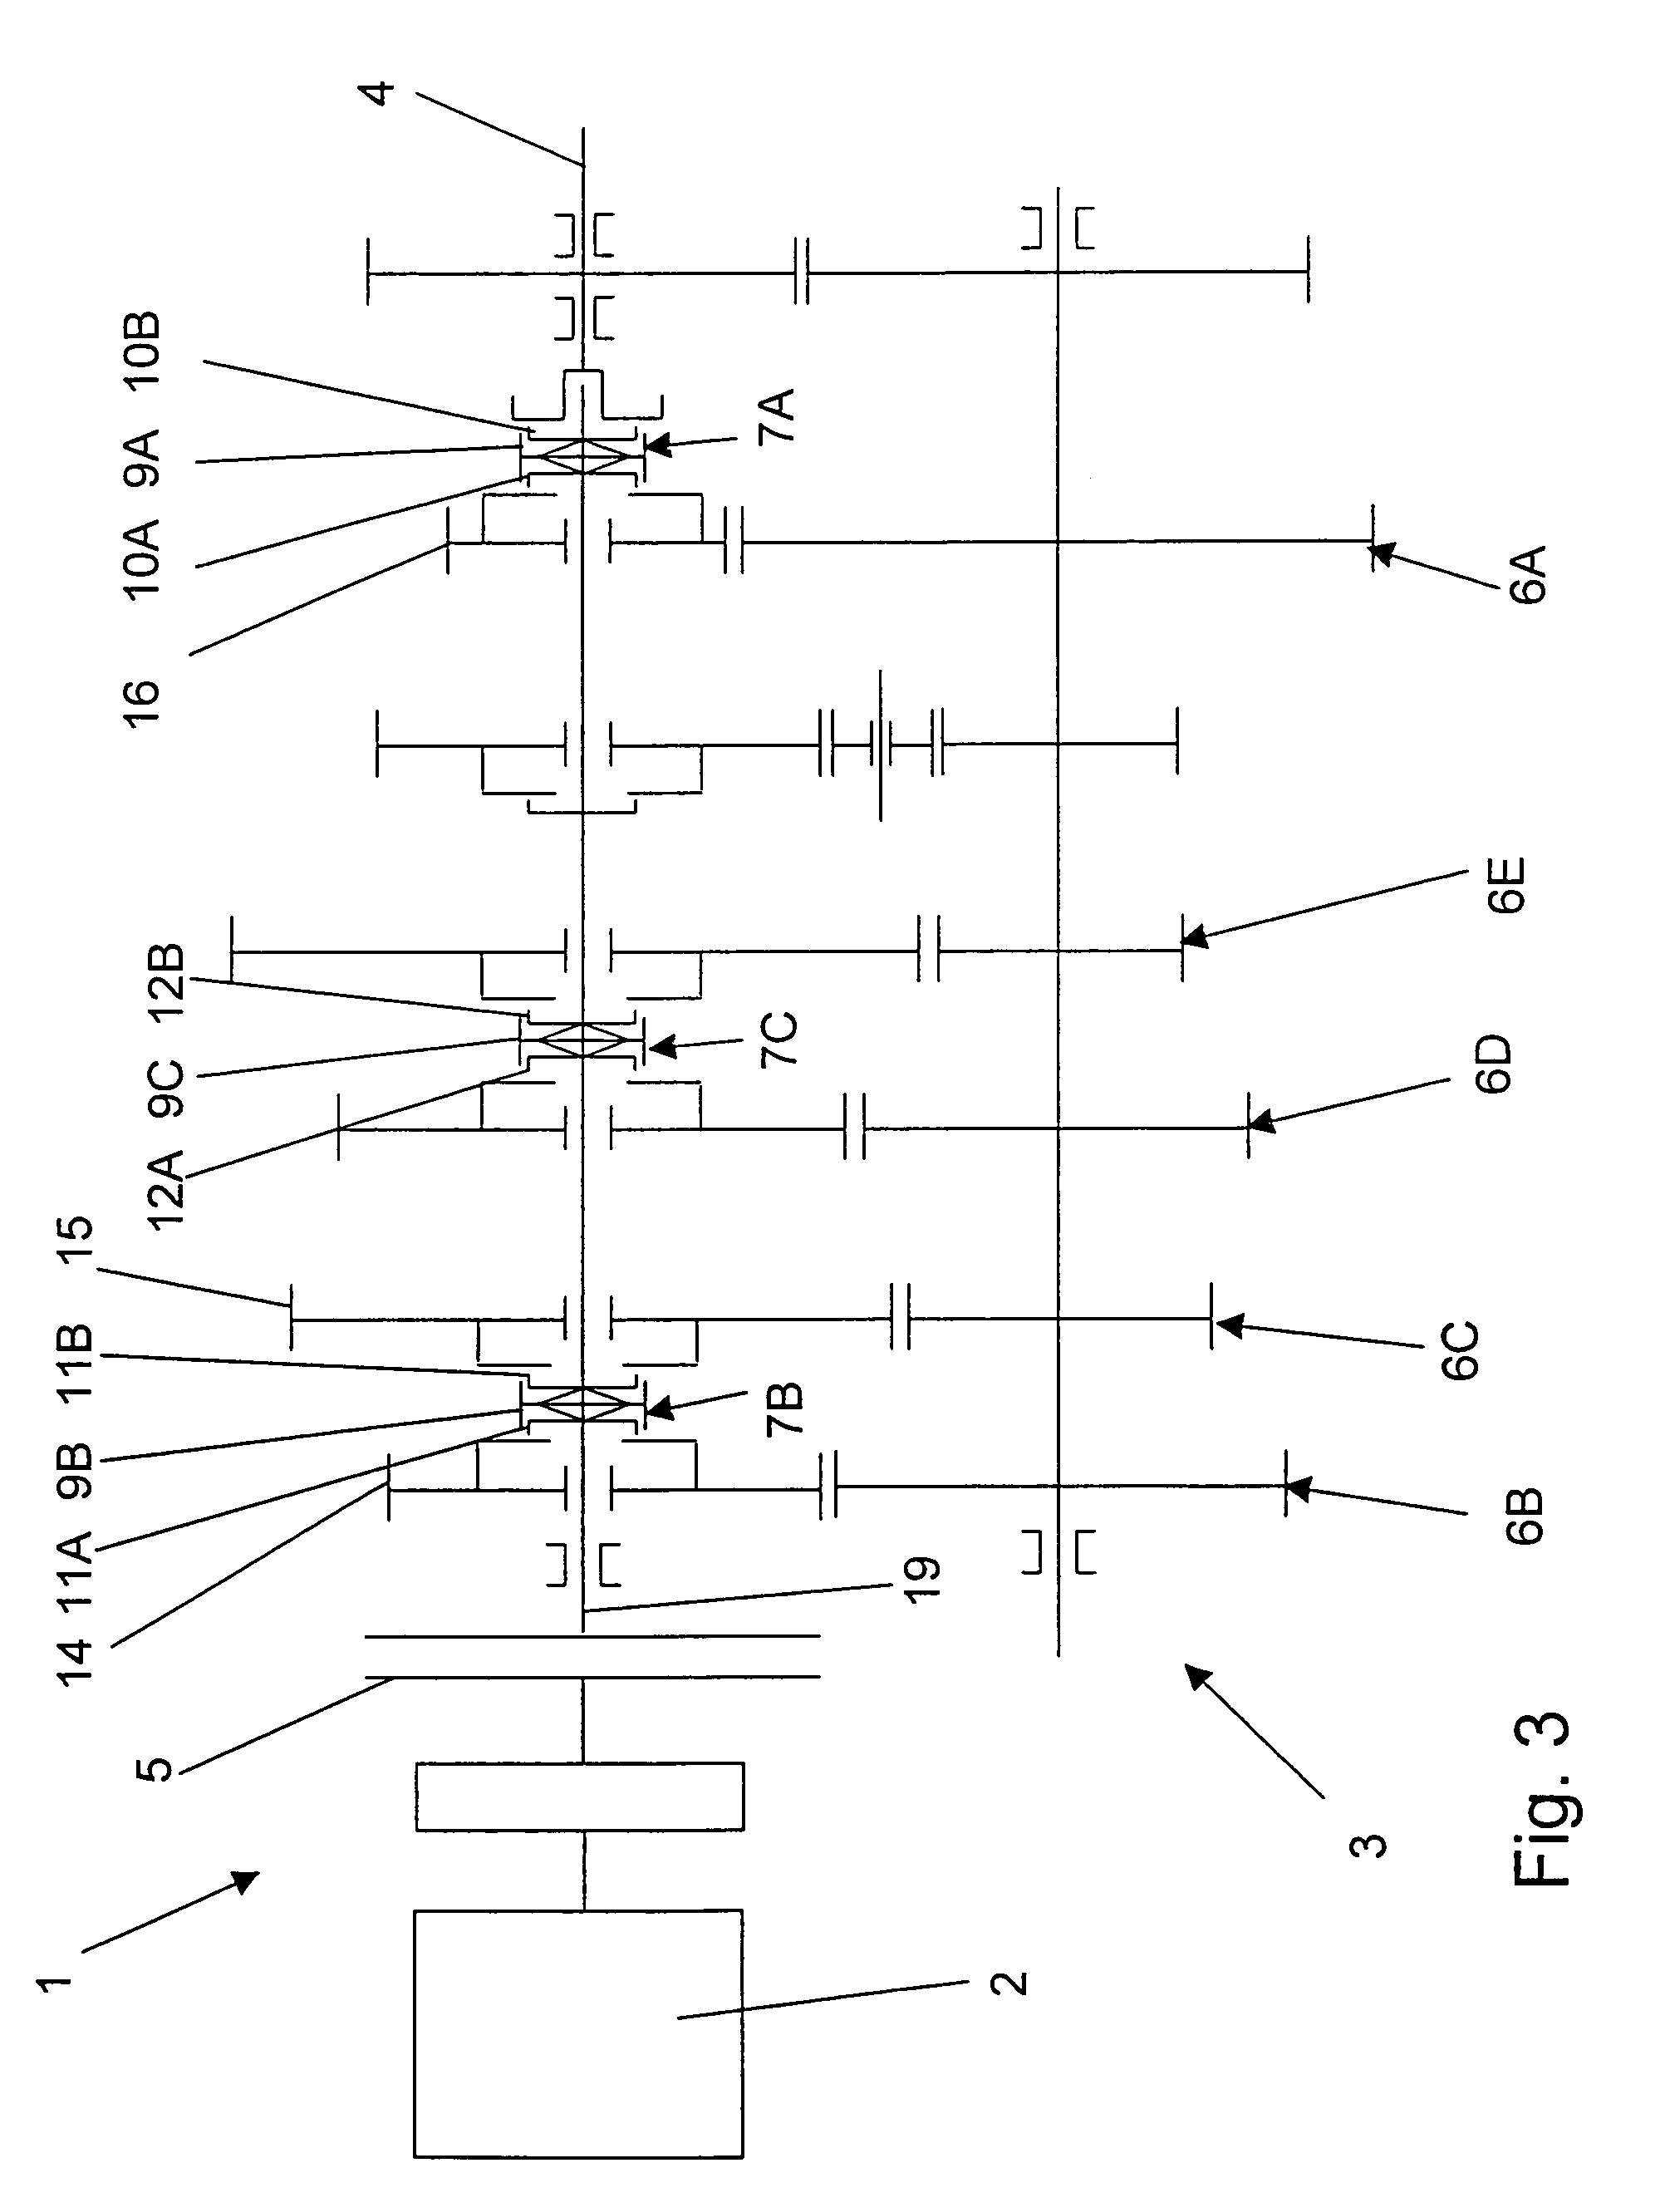 Method for controlling and regulating a drive train